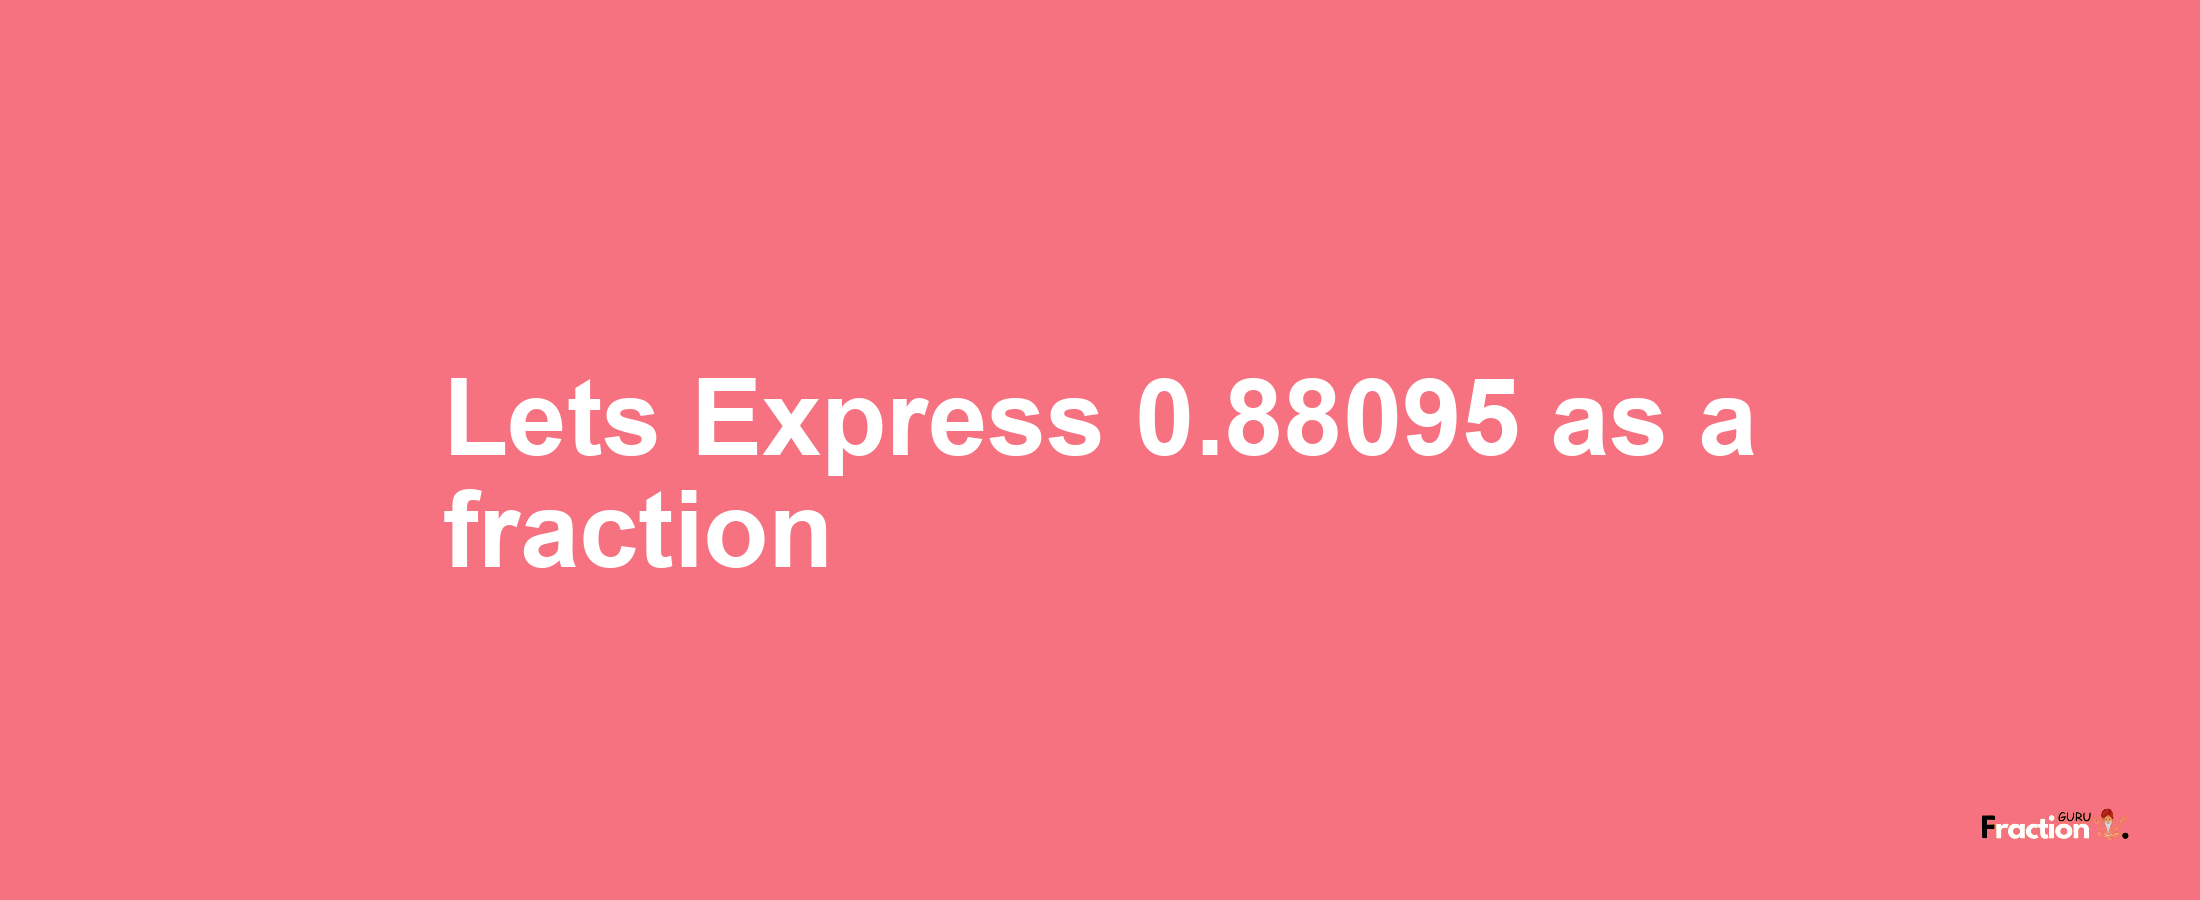 Lets Express 0.88095 as afraction